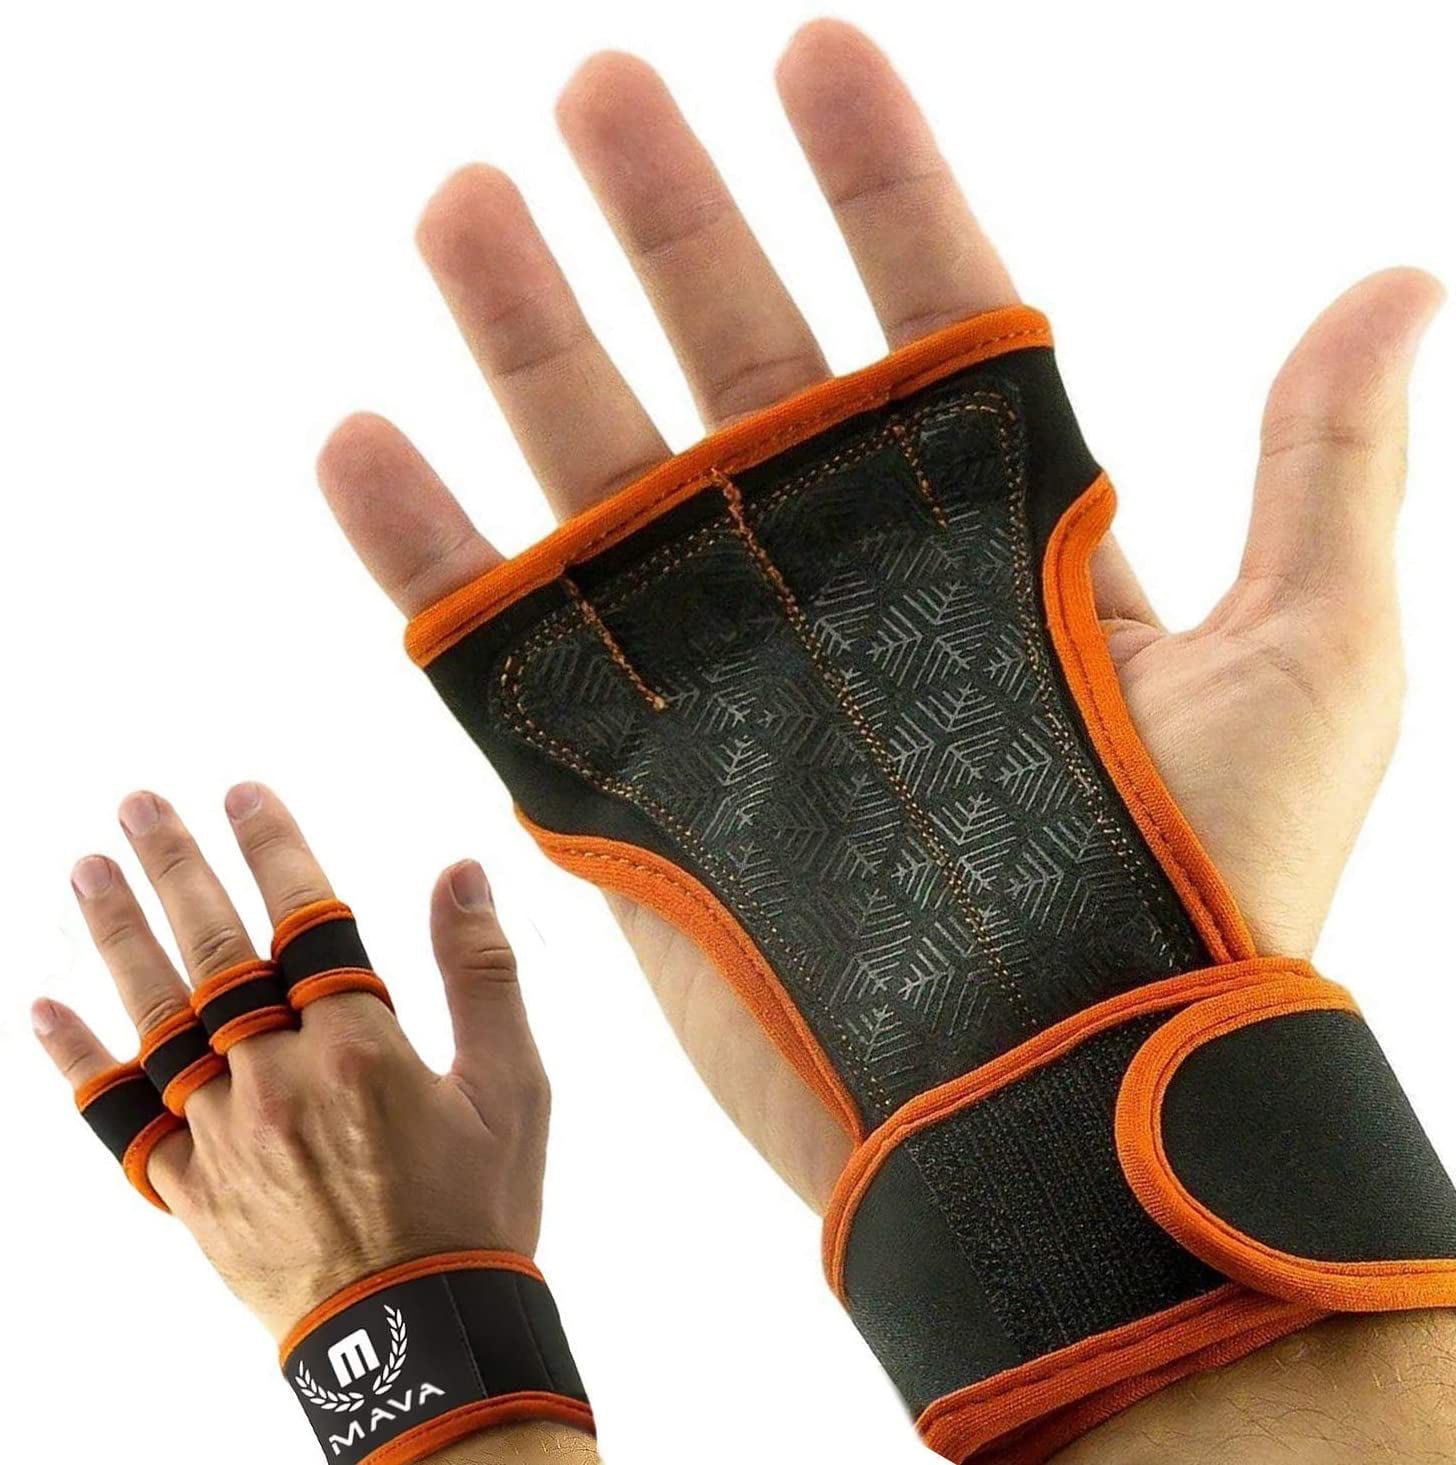 Details about   Mava Sports Small Wrist Wrap Support Gloves Gym Workout Training Bright Orange 